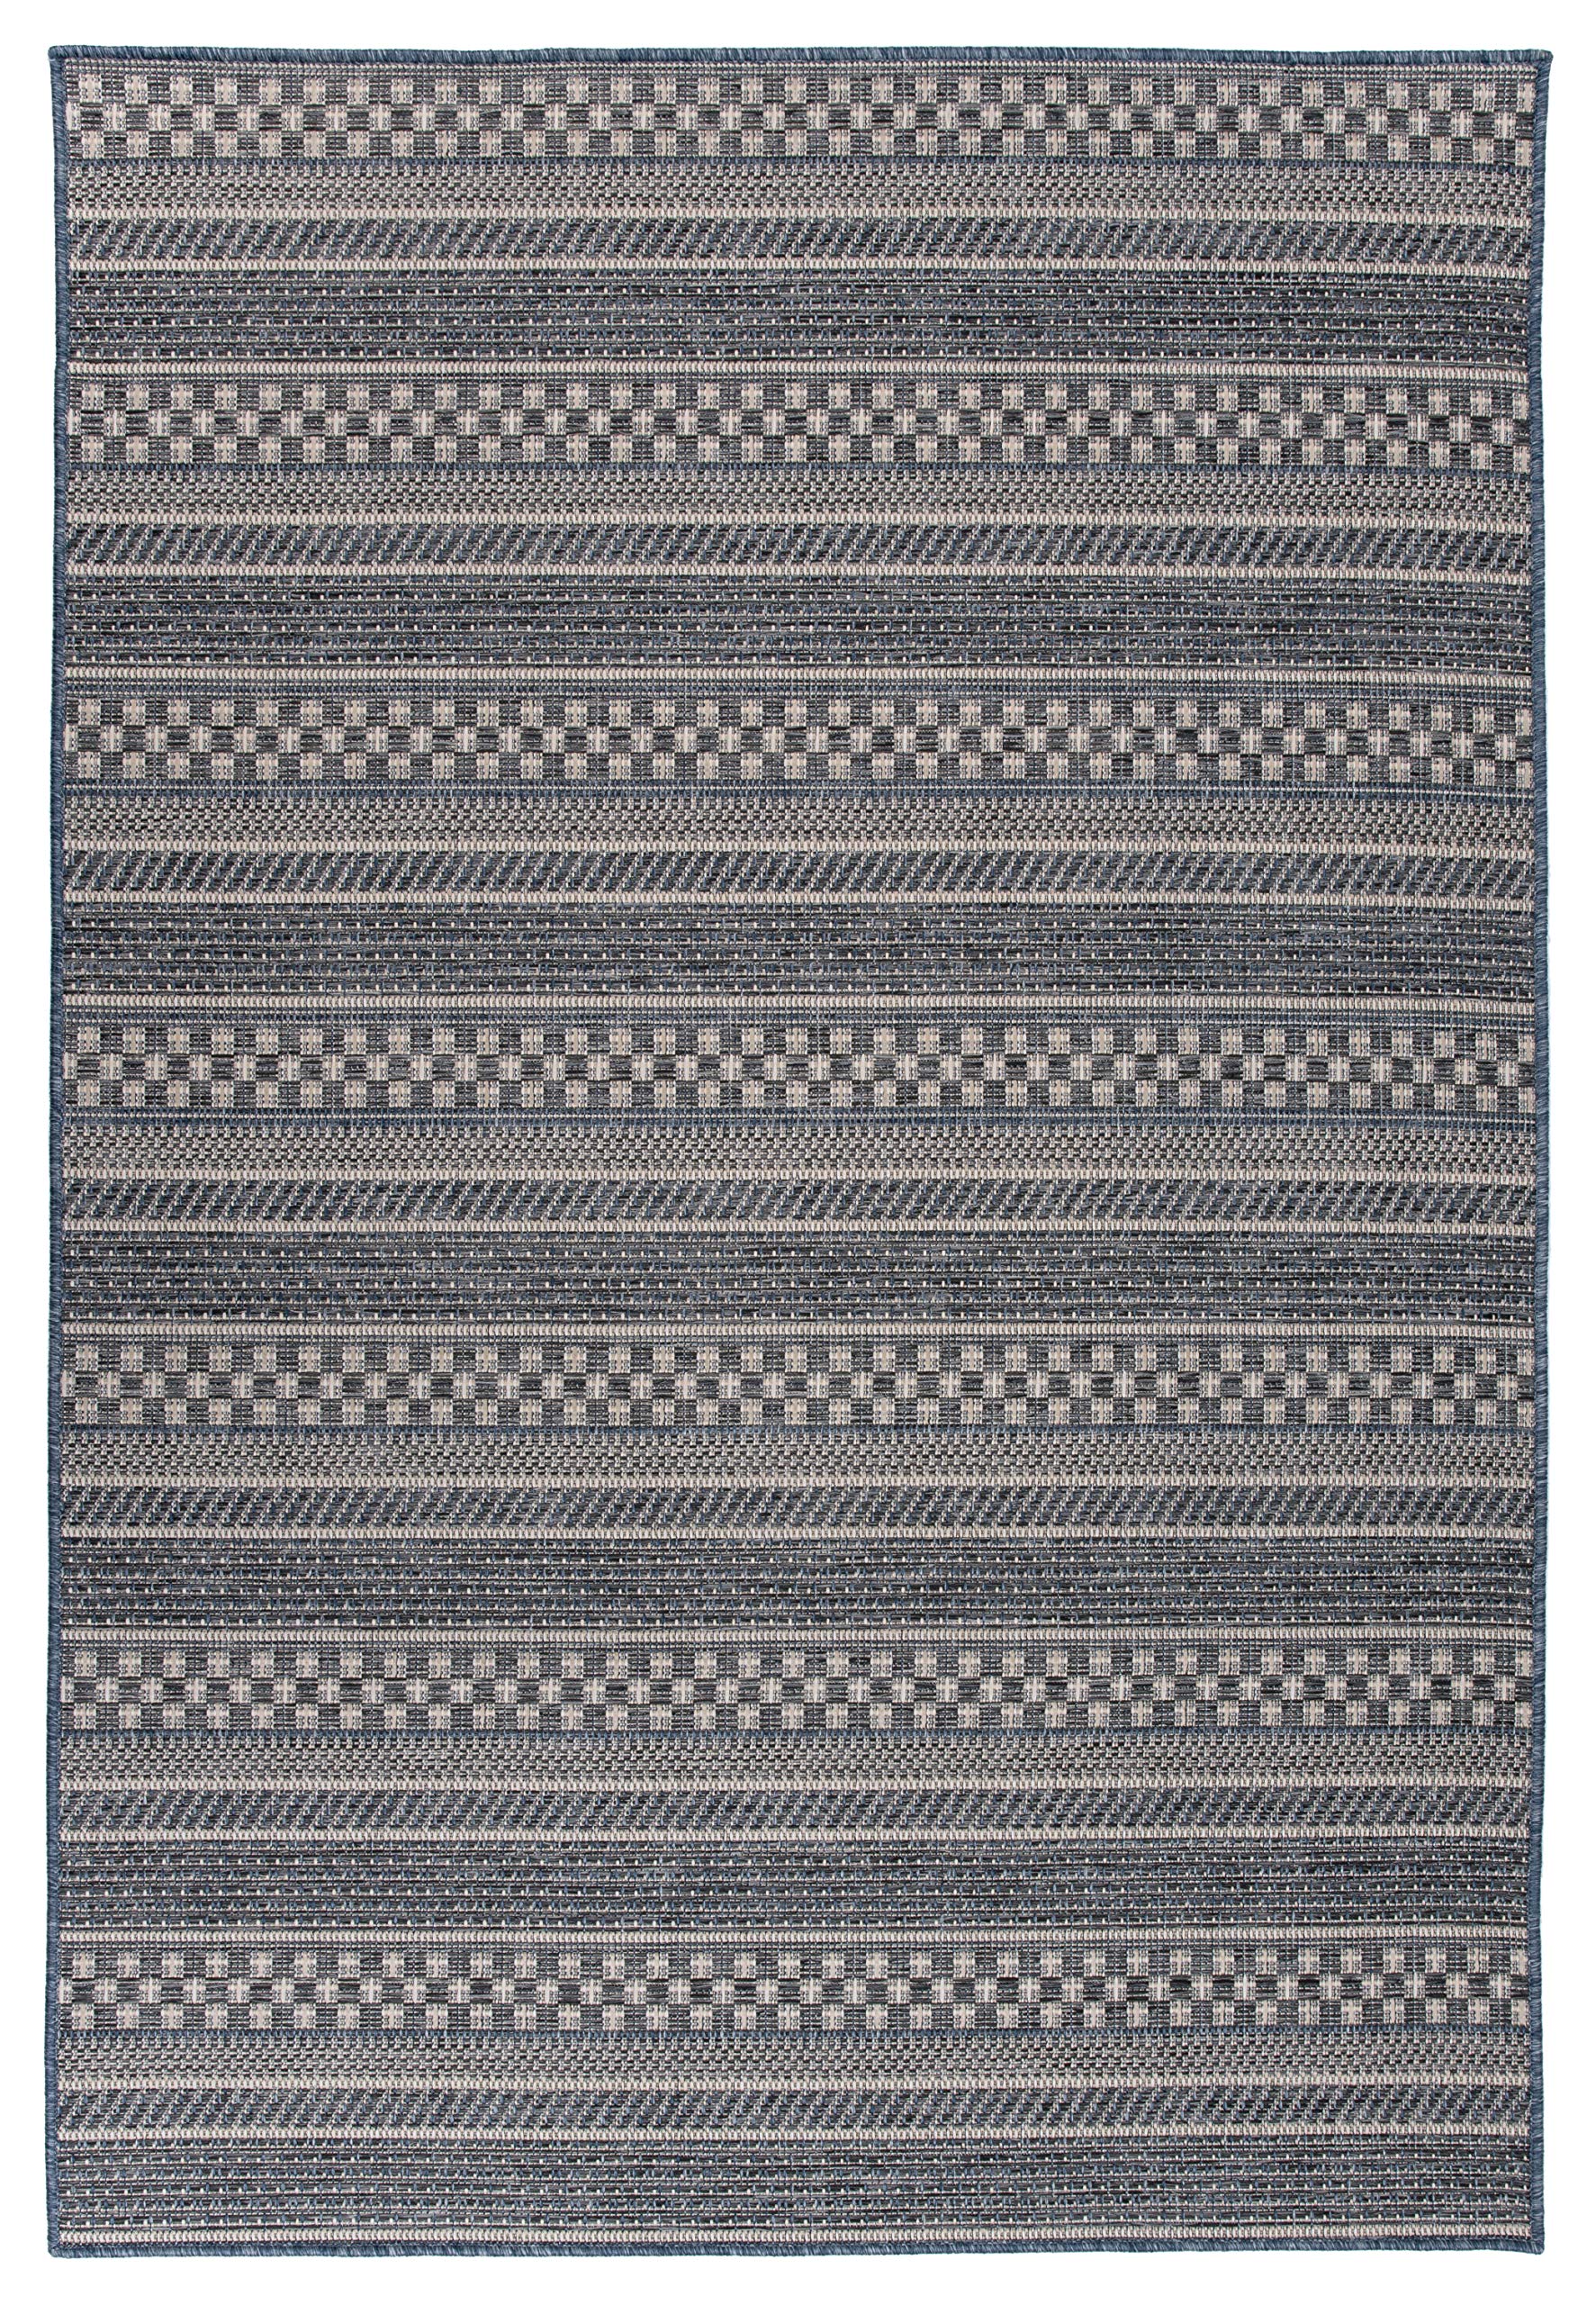 Rugshop Bohemian Stripes for Patio Rugs,Deck Rugs,Balcony Rugs Indoor/Outdoor Area Rug 7'10" x 10' Blue